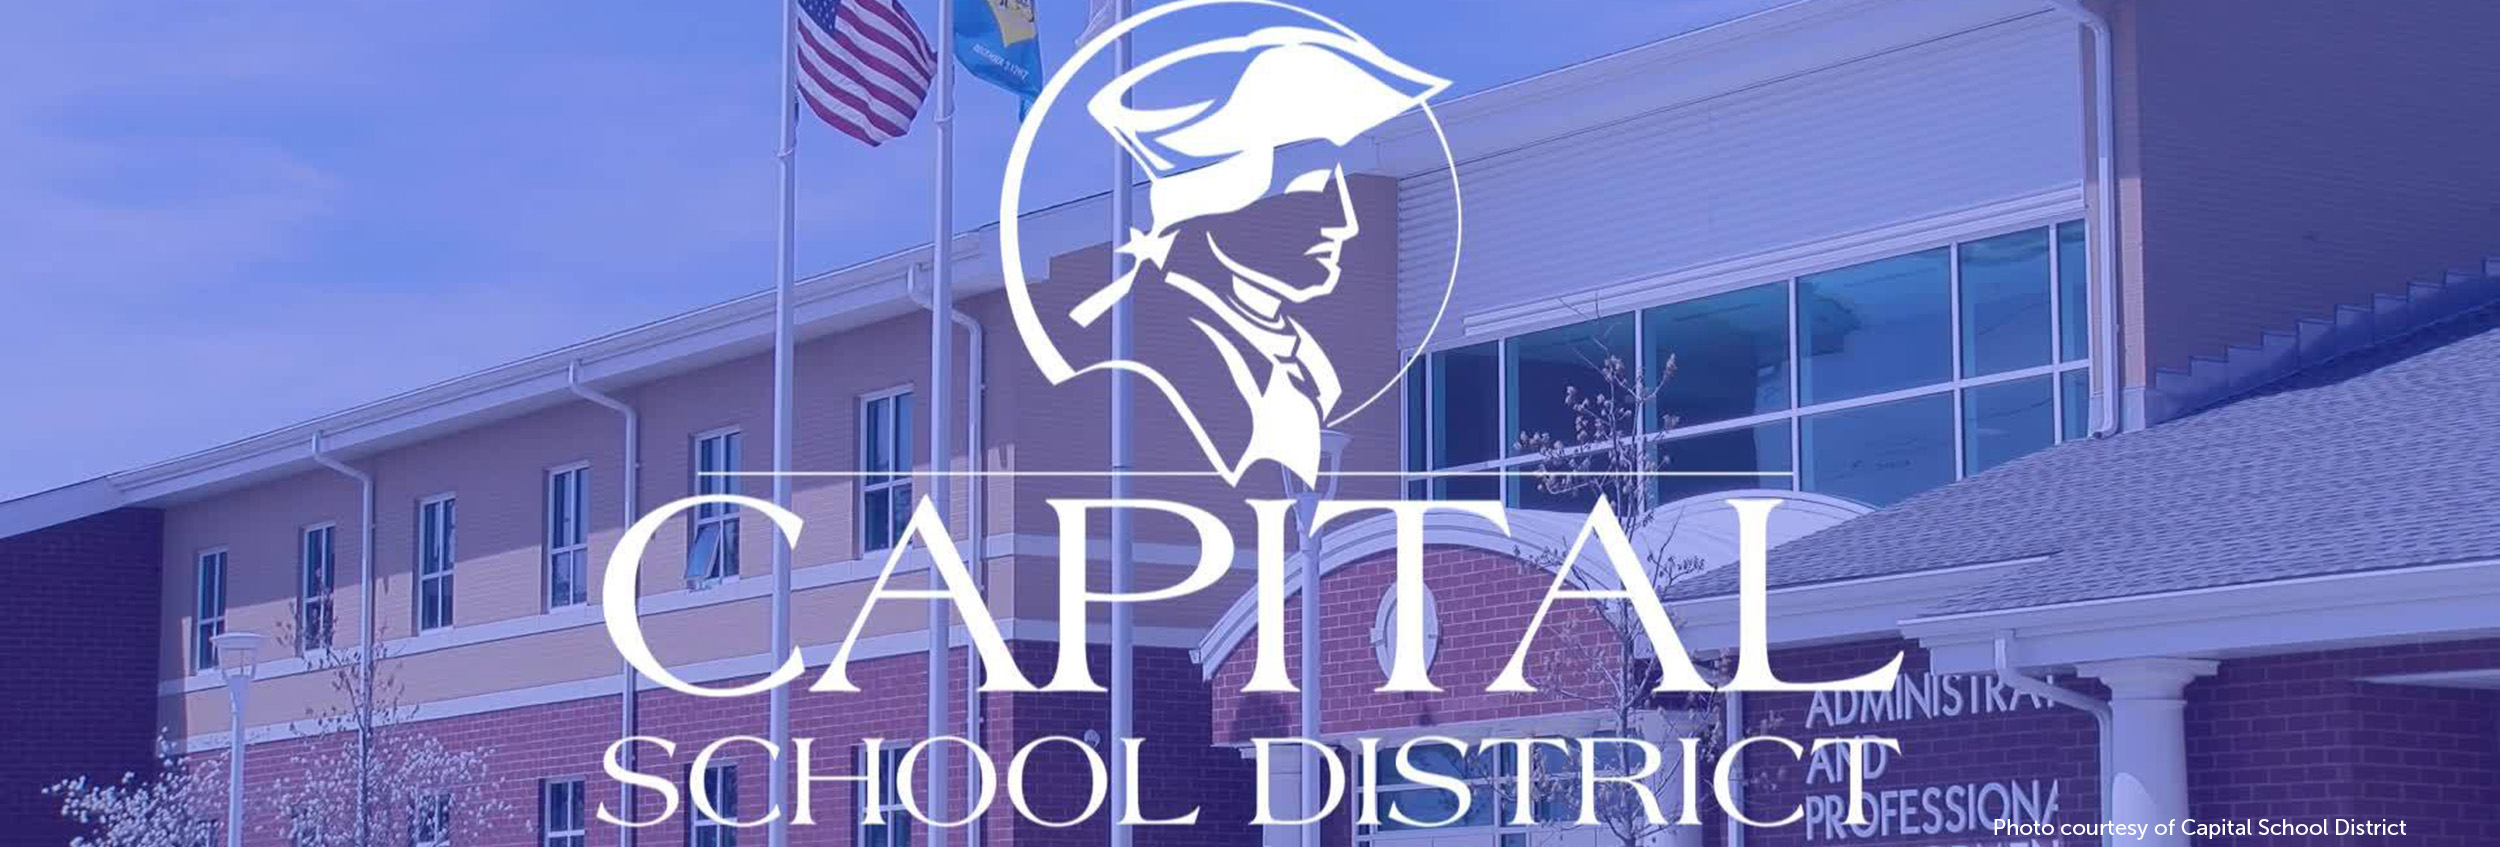 Capital School District logo overlaying image of administrative building